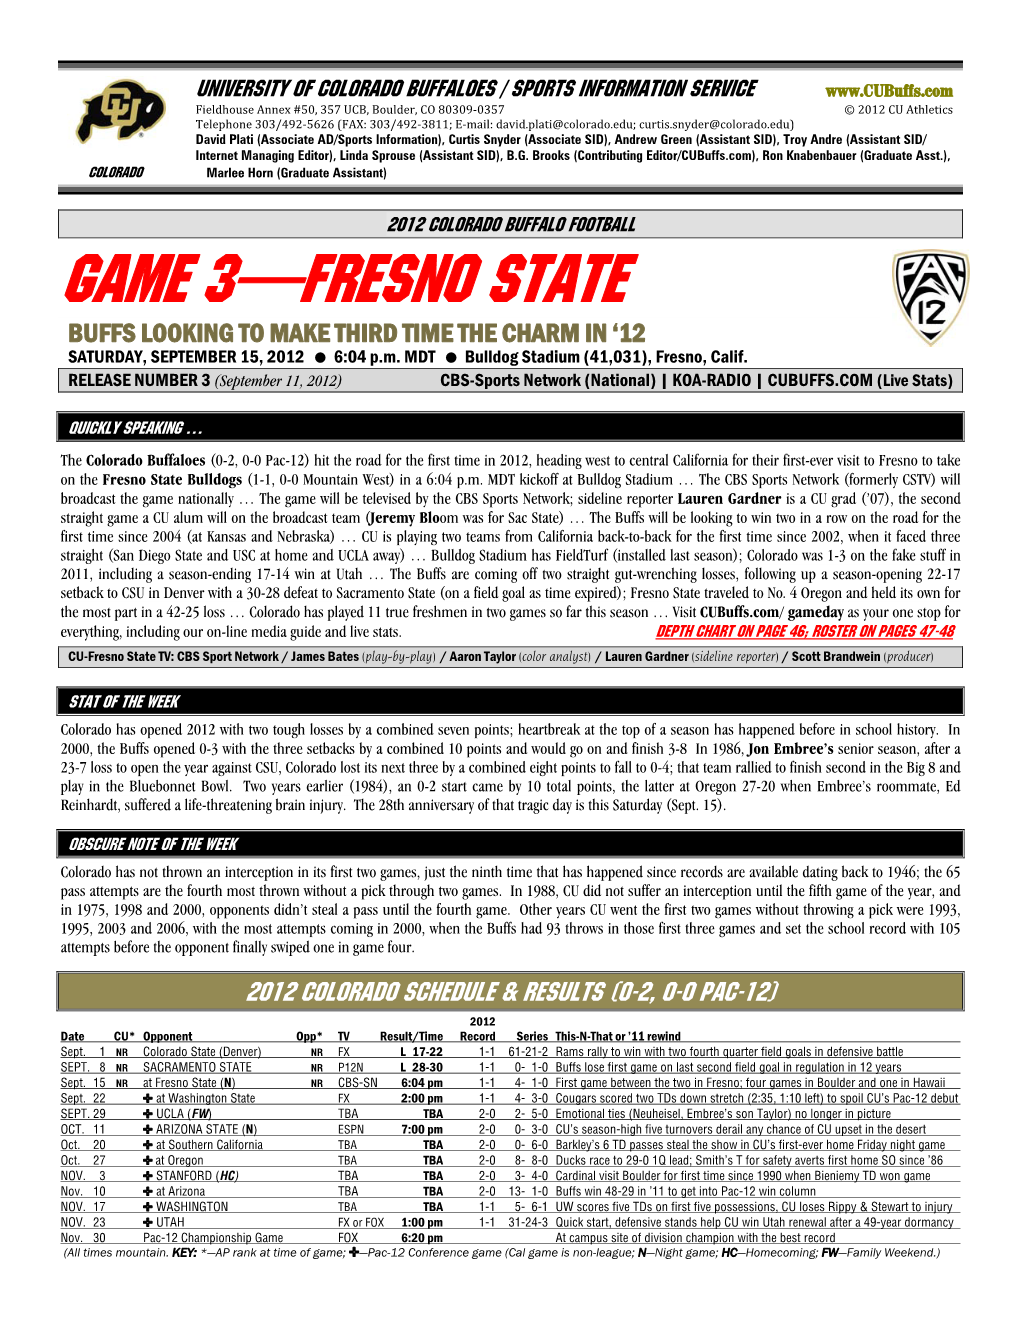 GAME 3—FRESNO STATE BUFFS LOOKING to MAKE THIRD TIME the CHARM in ‘12 SATURDAY, SEPTEMBER 15, 2012 6:04 P.M